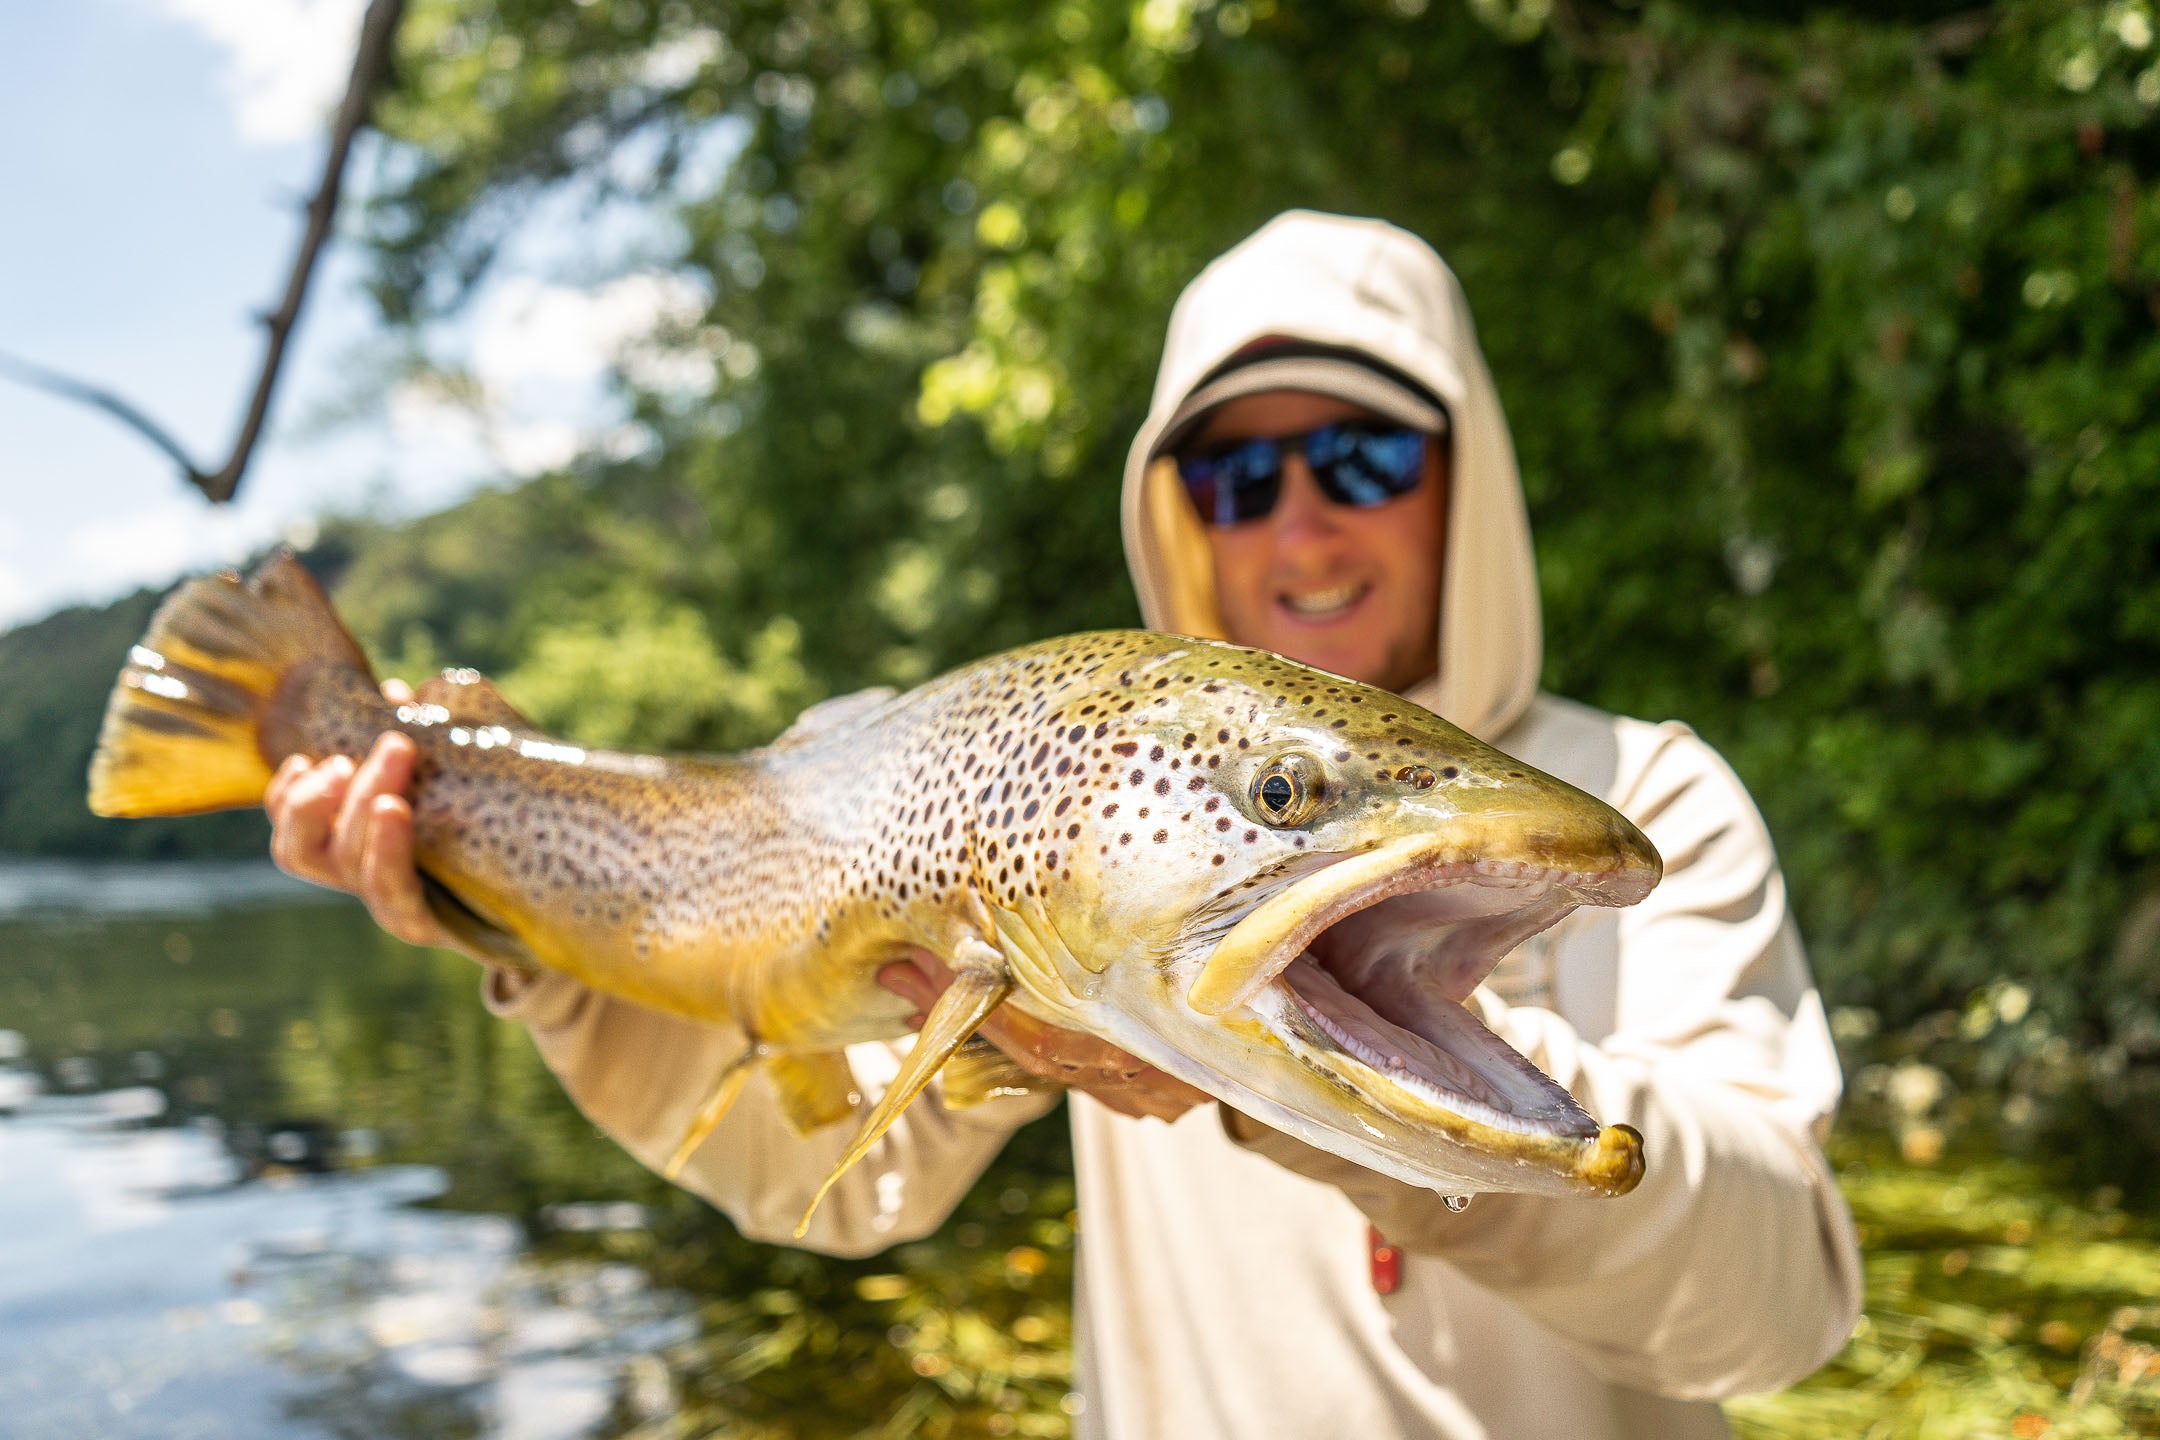 Musings from a Recent Trip to The White River - Tailwaters Fly Fishing